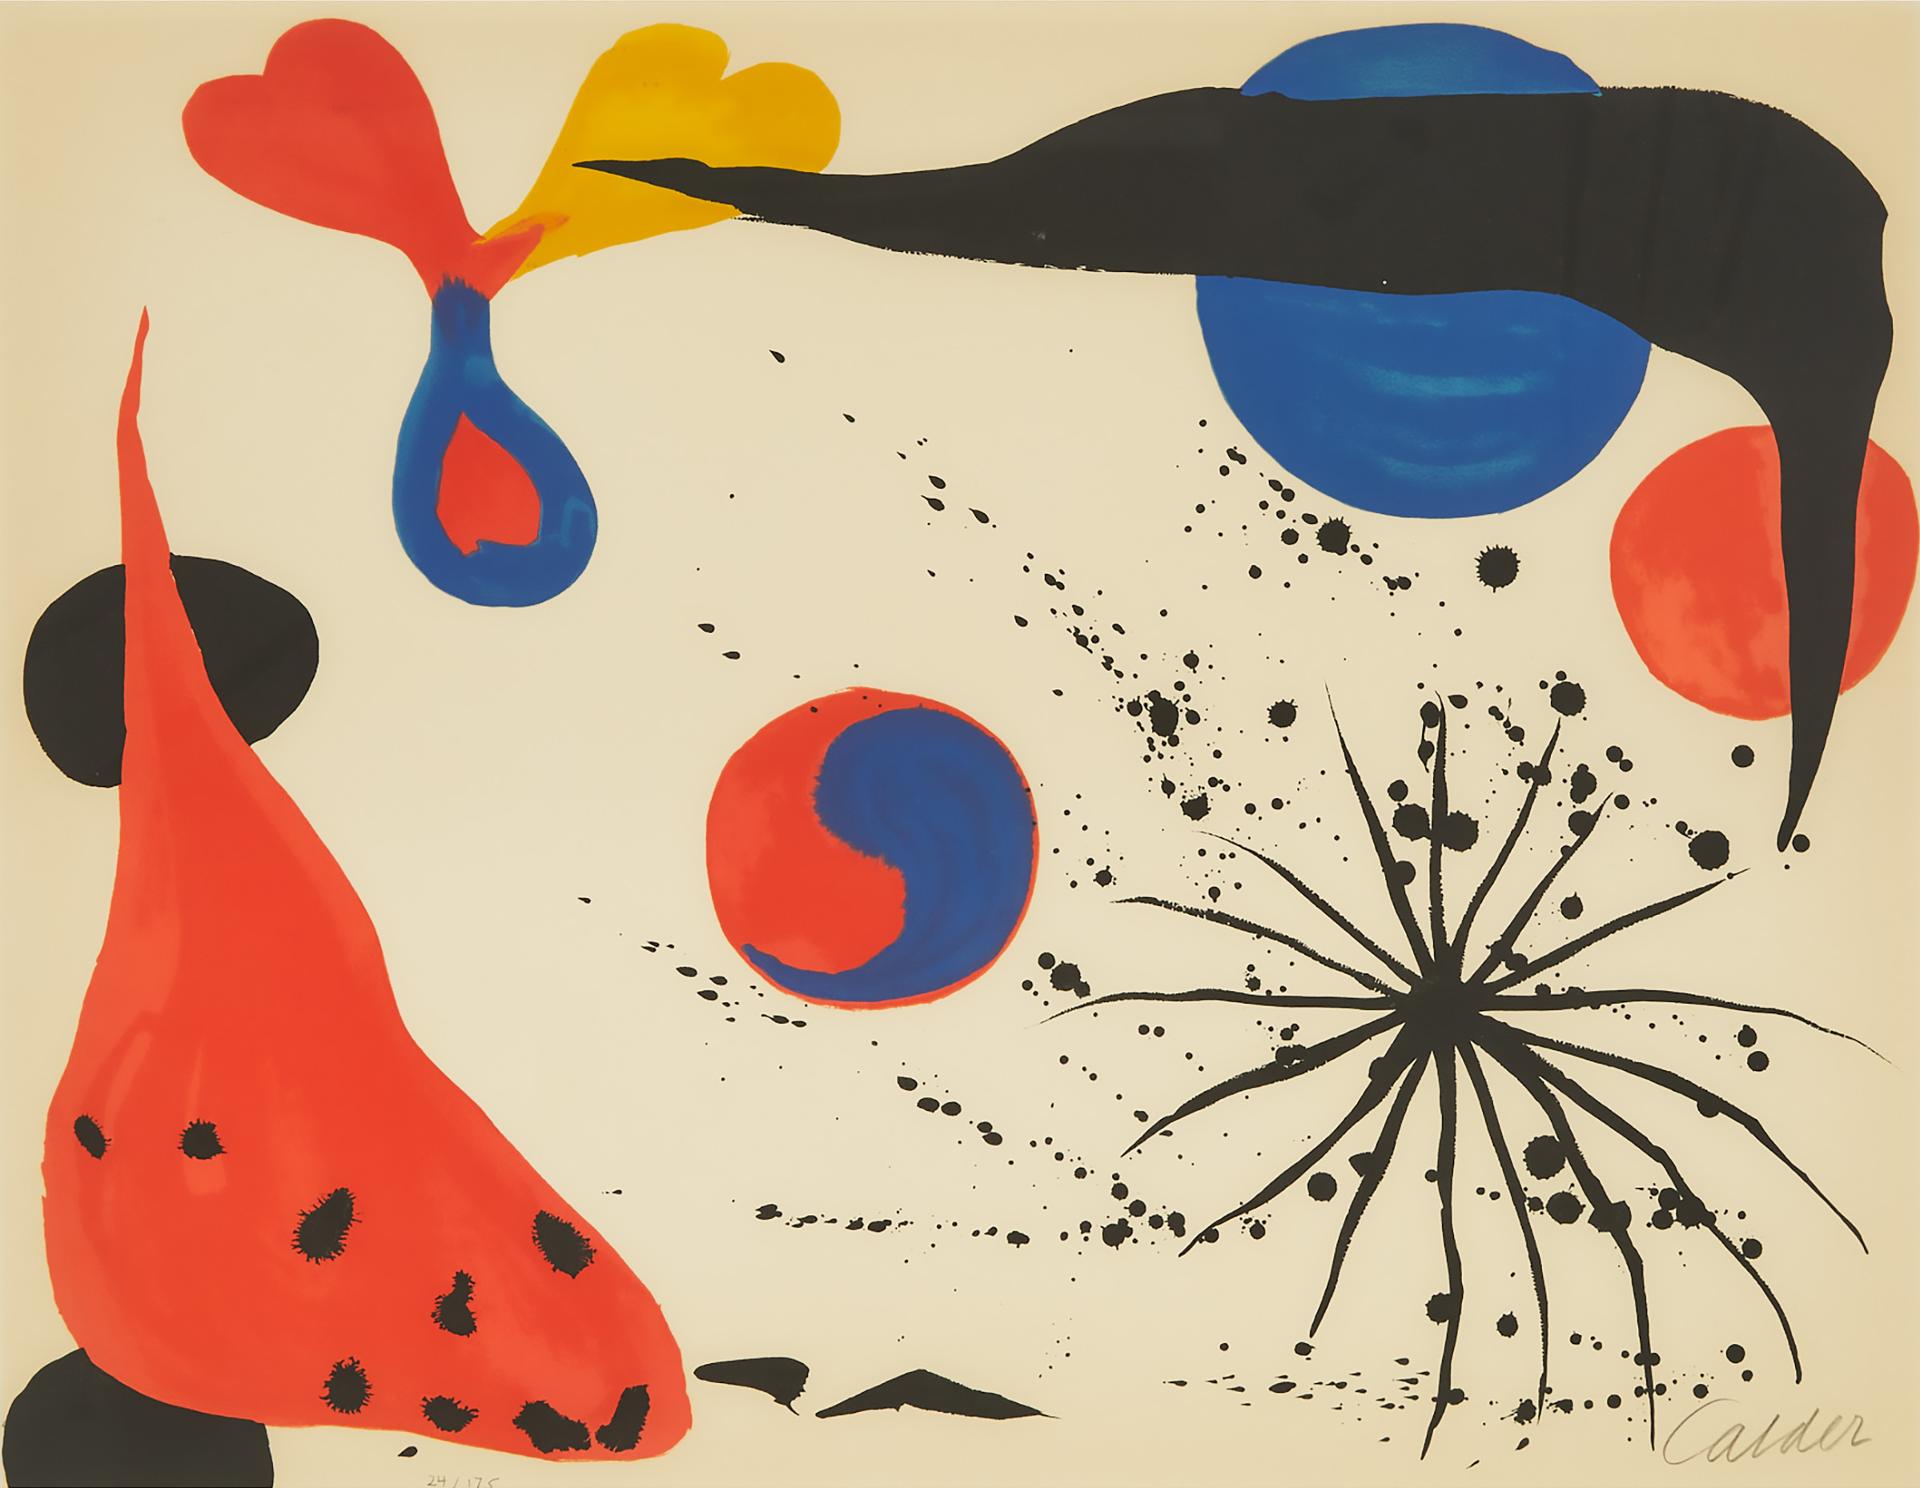 Alexander Calder (1898-1976) - Flies In The Spider Web (Ying And Yang), 1976